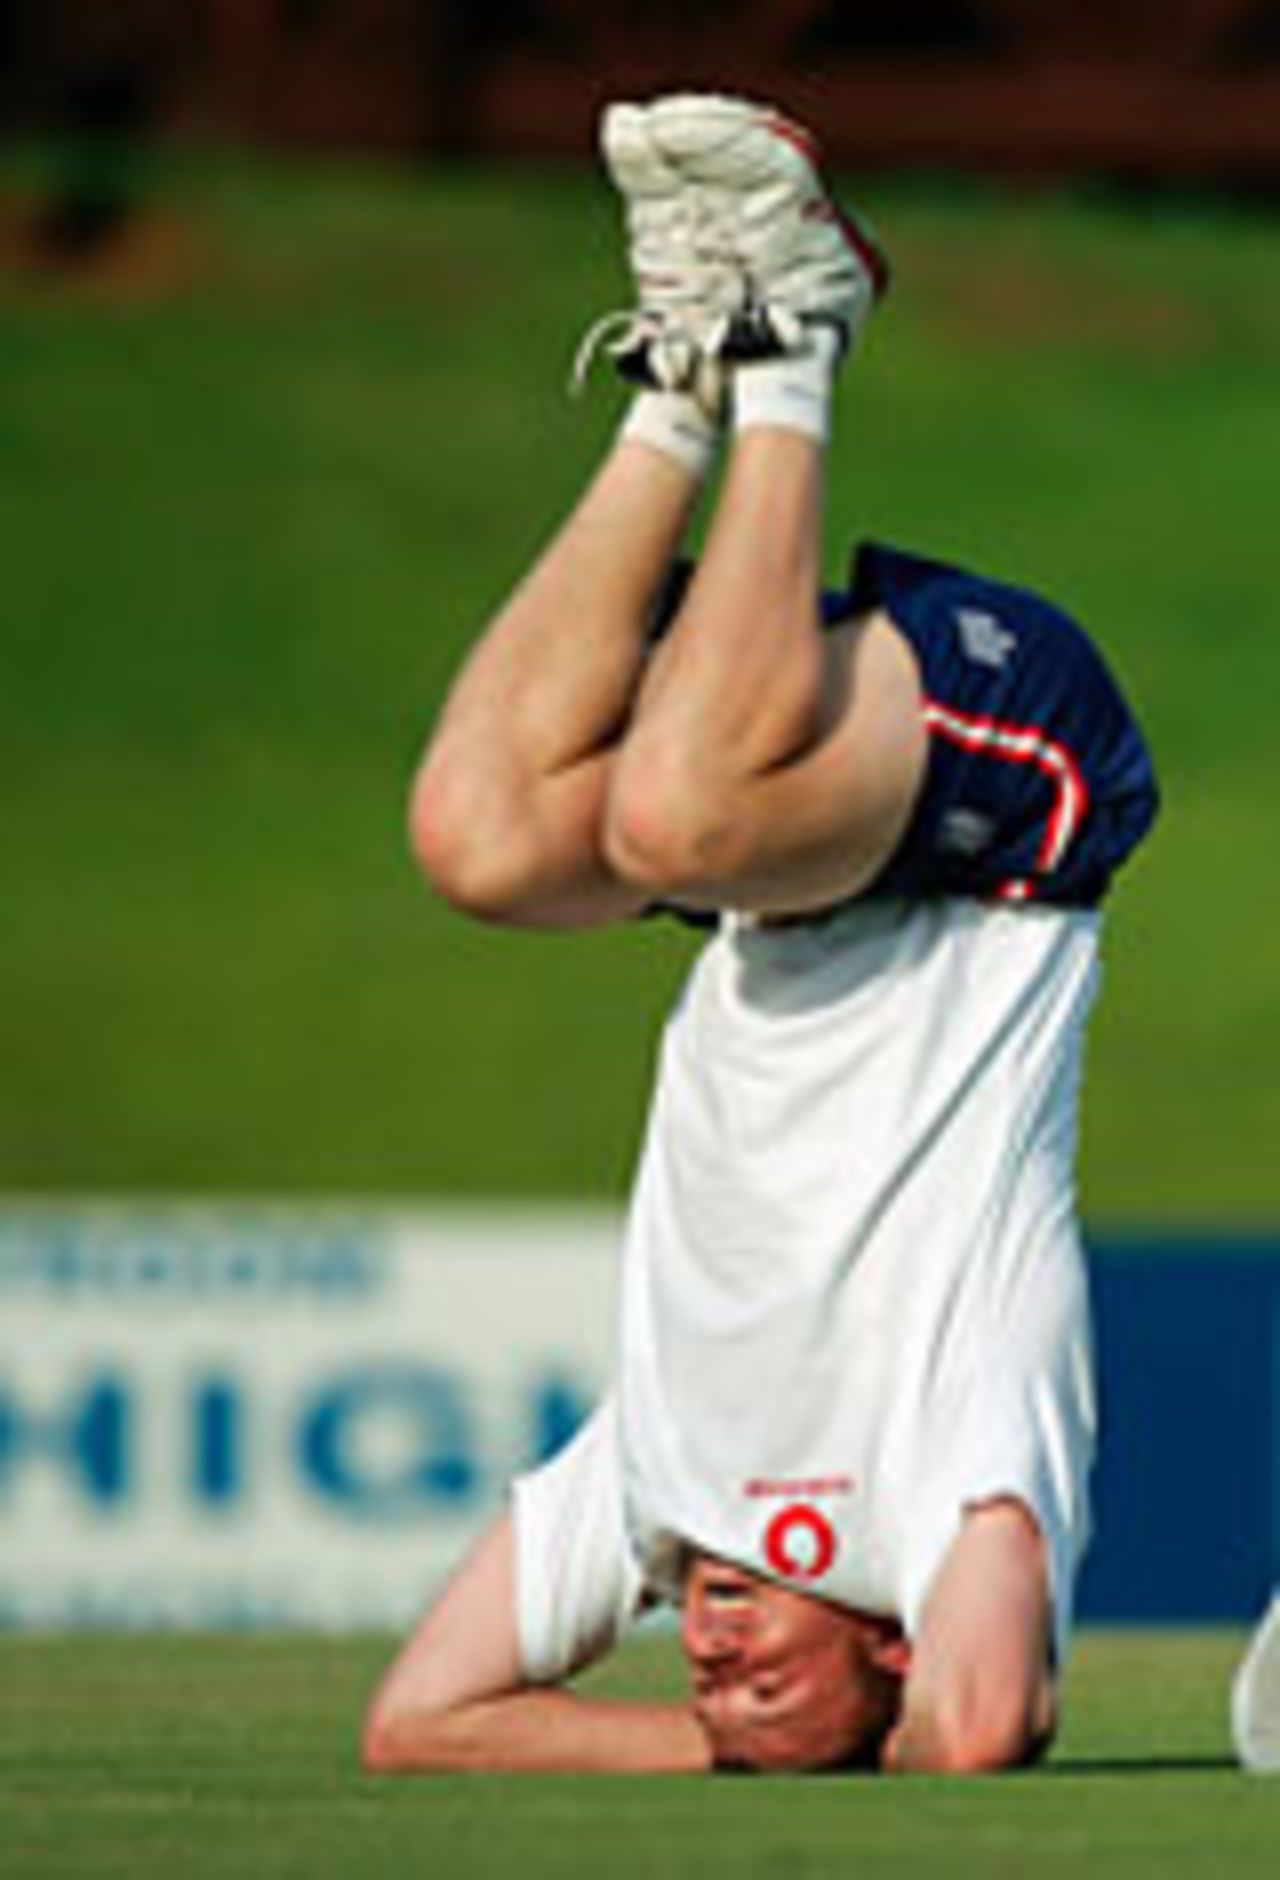 Andrew Flintoff does a yoga headstand after an early finish, South Africa A v England XI, third day, Potchefstroom, December 13 2004